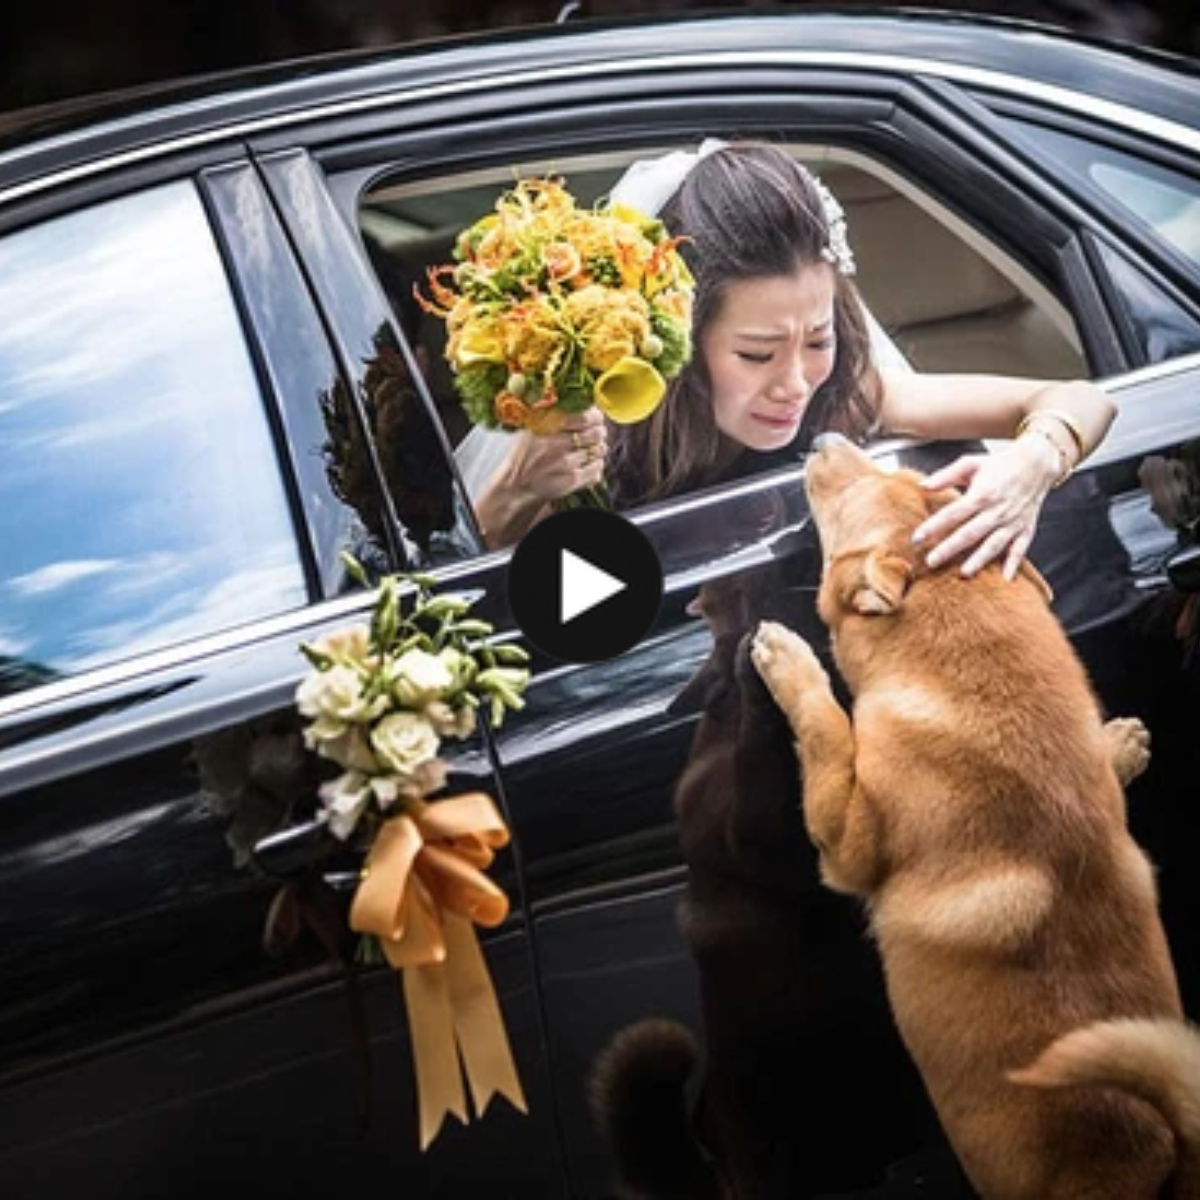 Incredible journey: The dog traveled more than 70 km to meet and say goodbye to his owner’s wedding